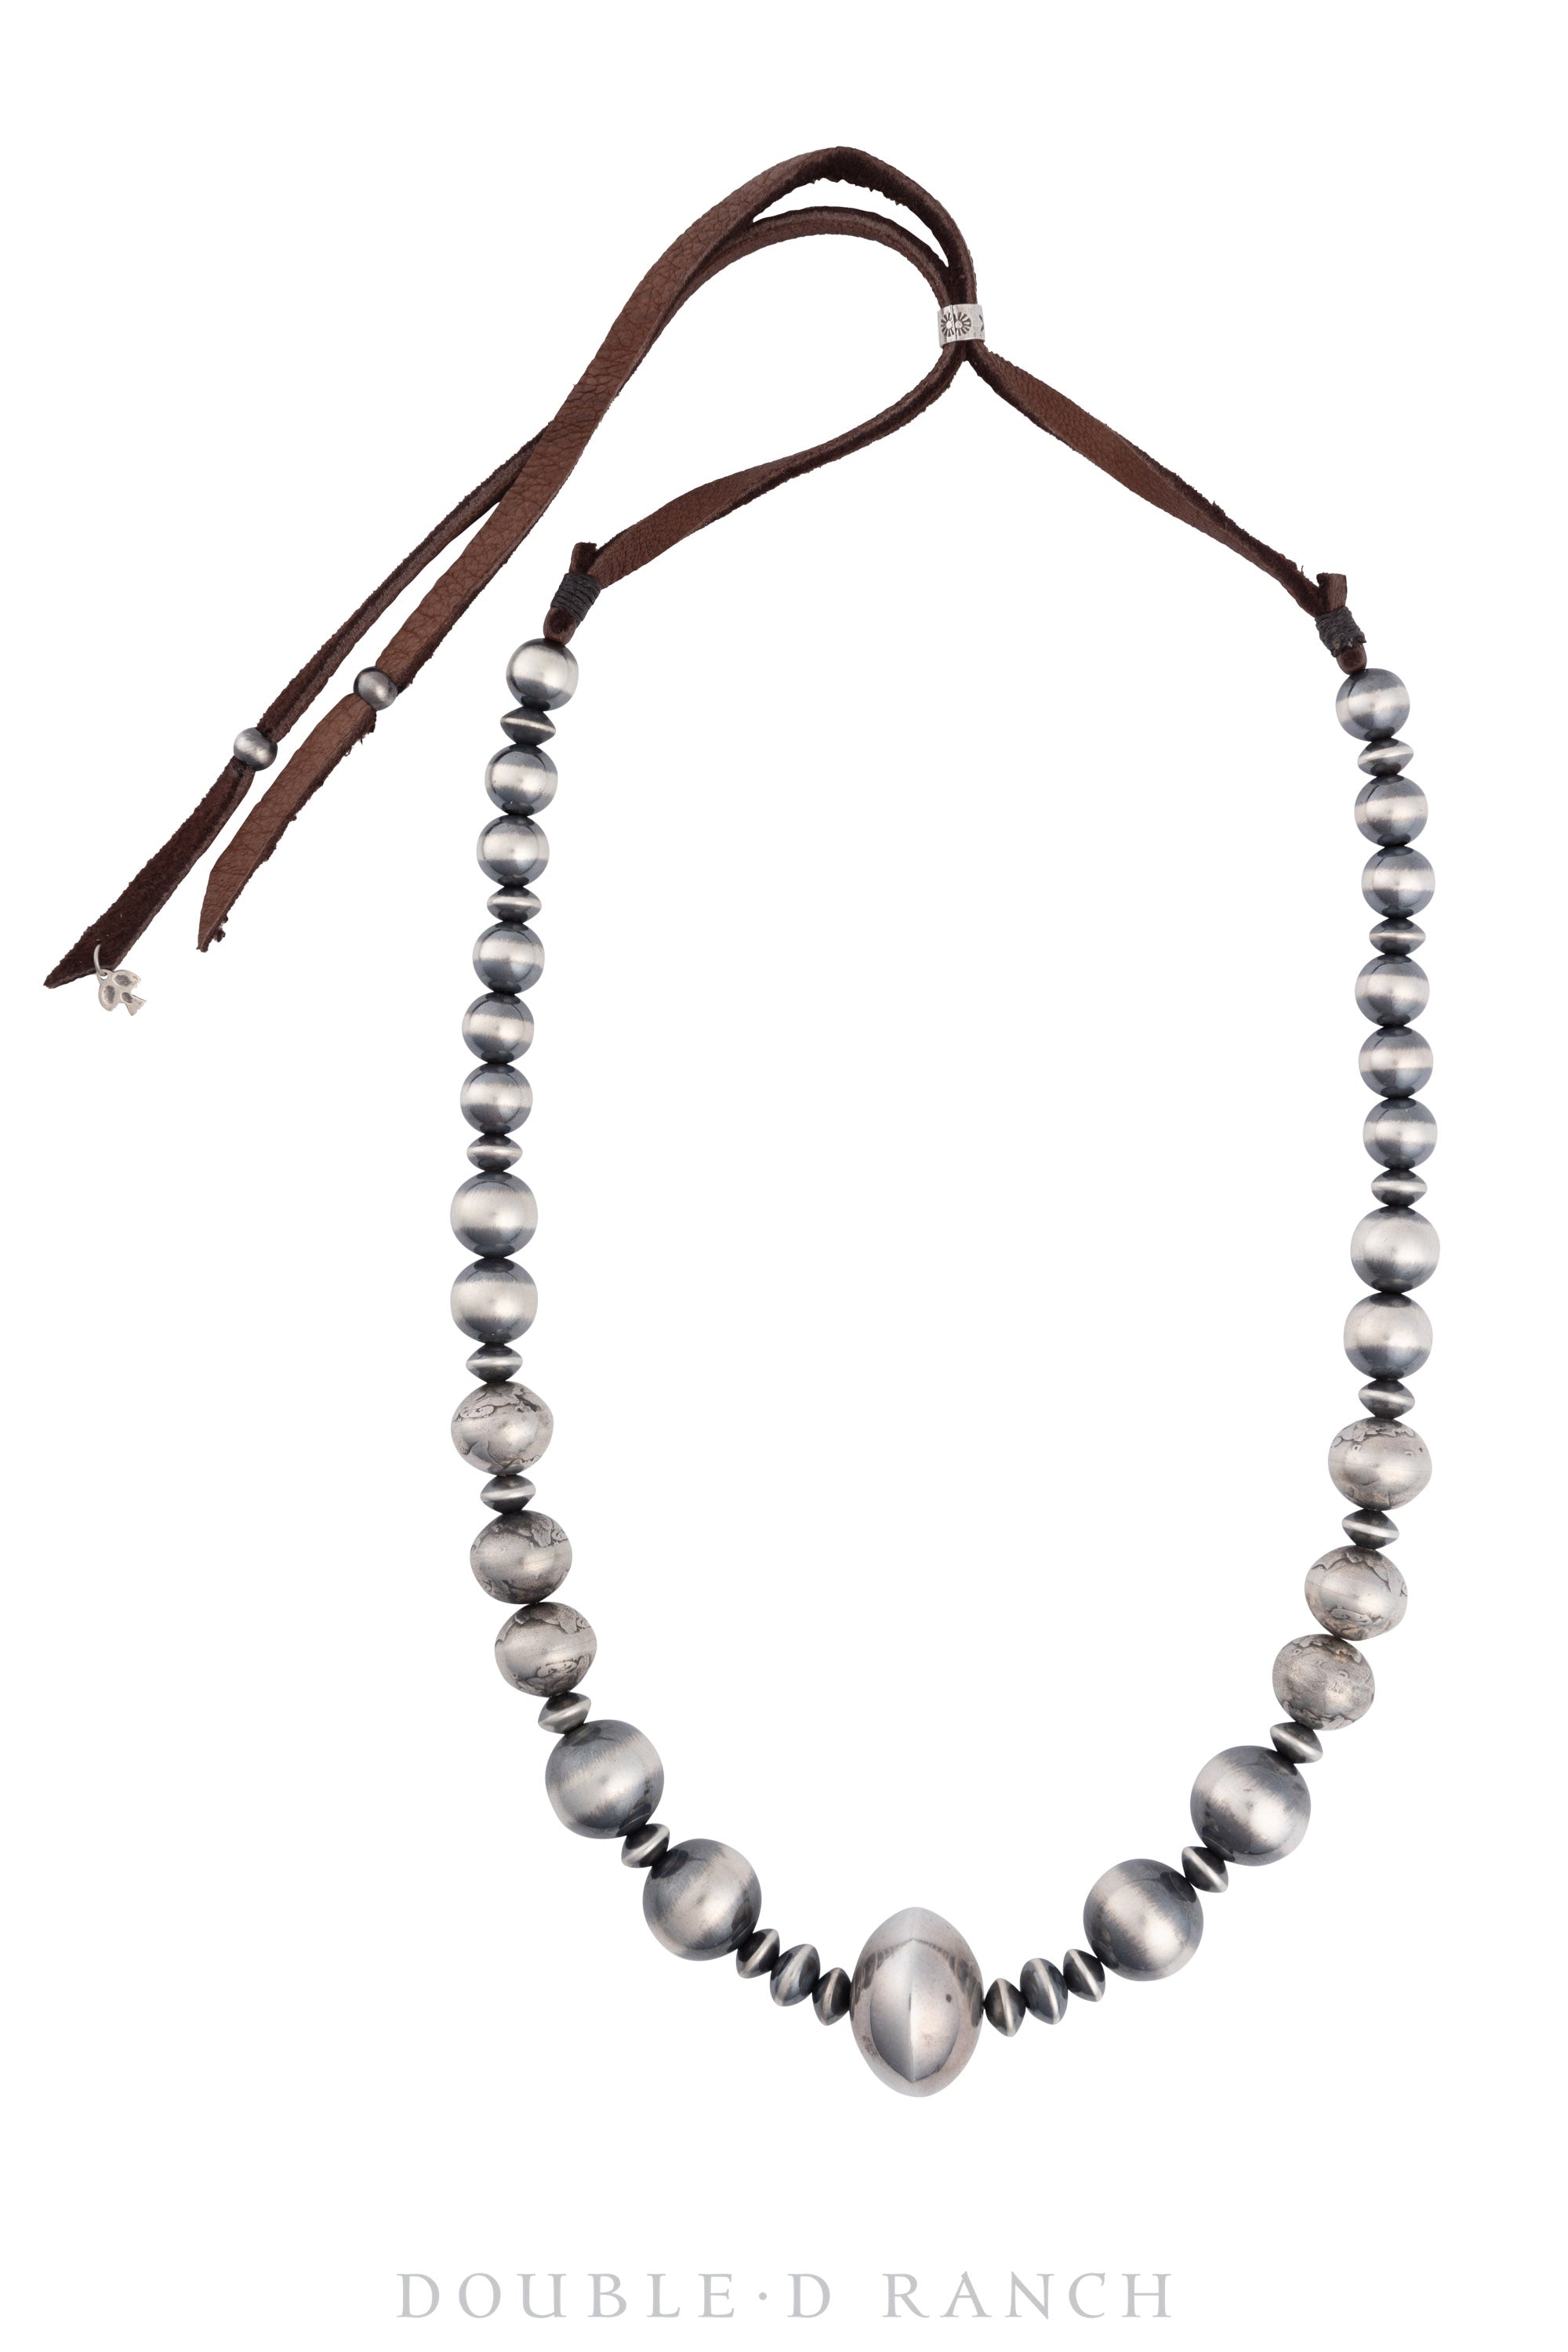 Necklace, Desert Pearl, Sterling Silver, Contemporary, 3088